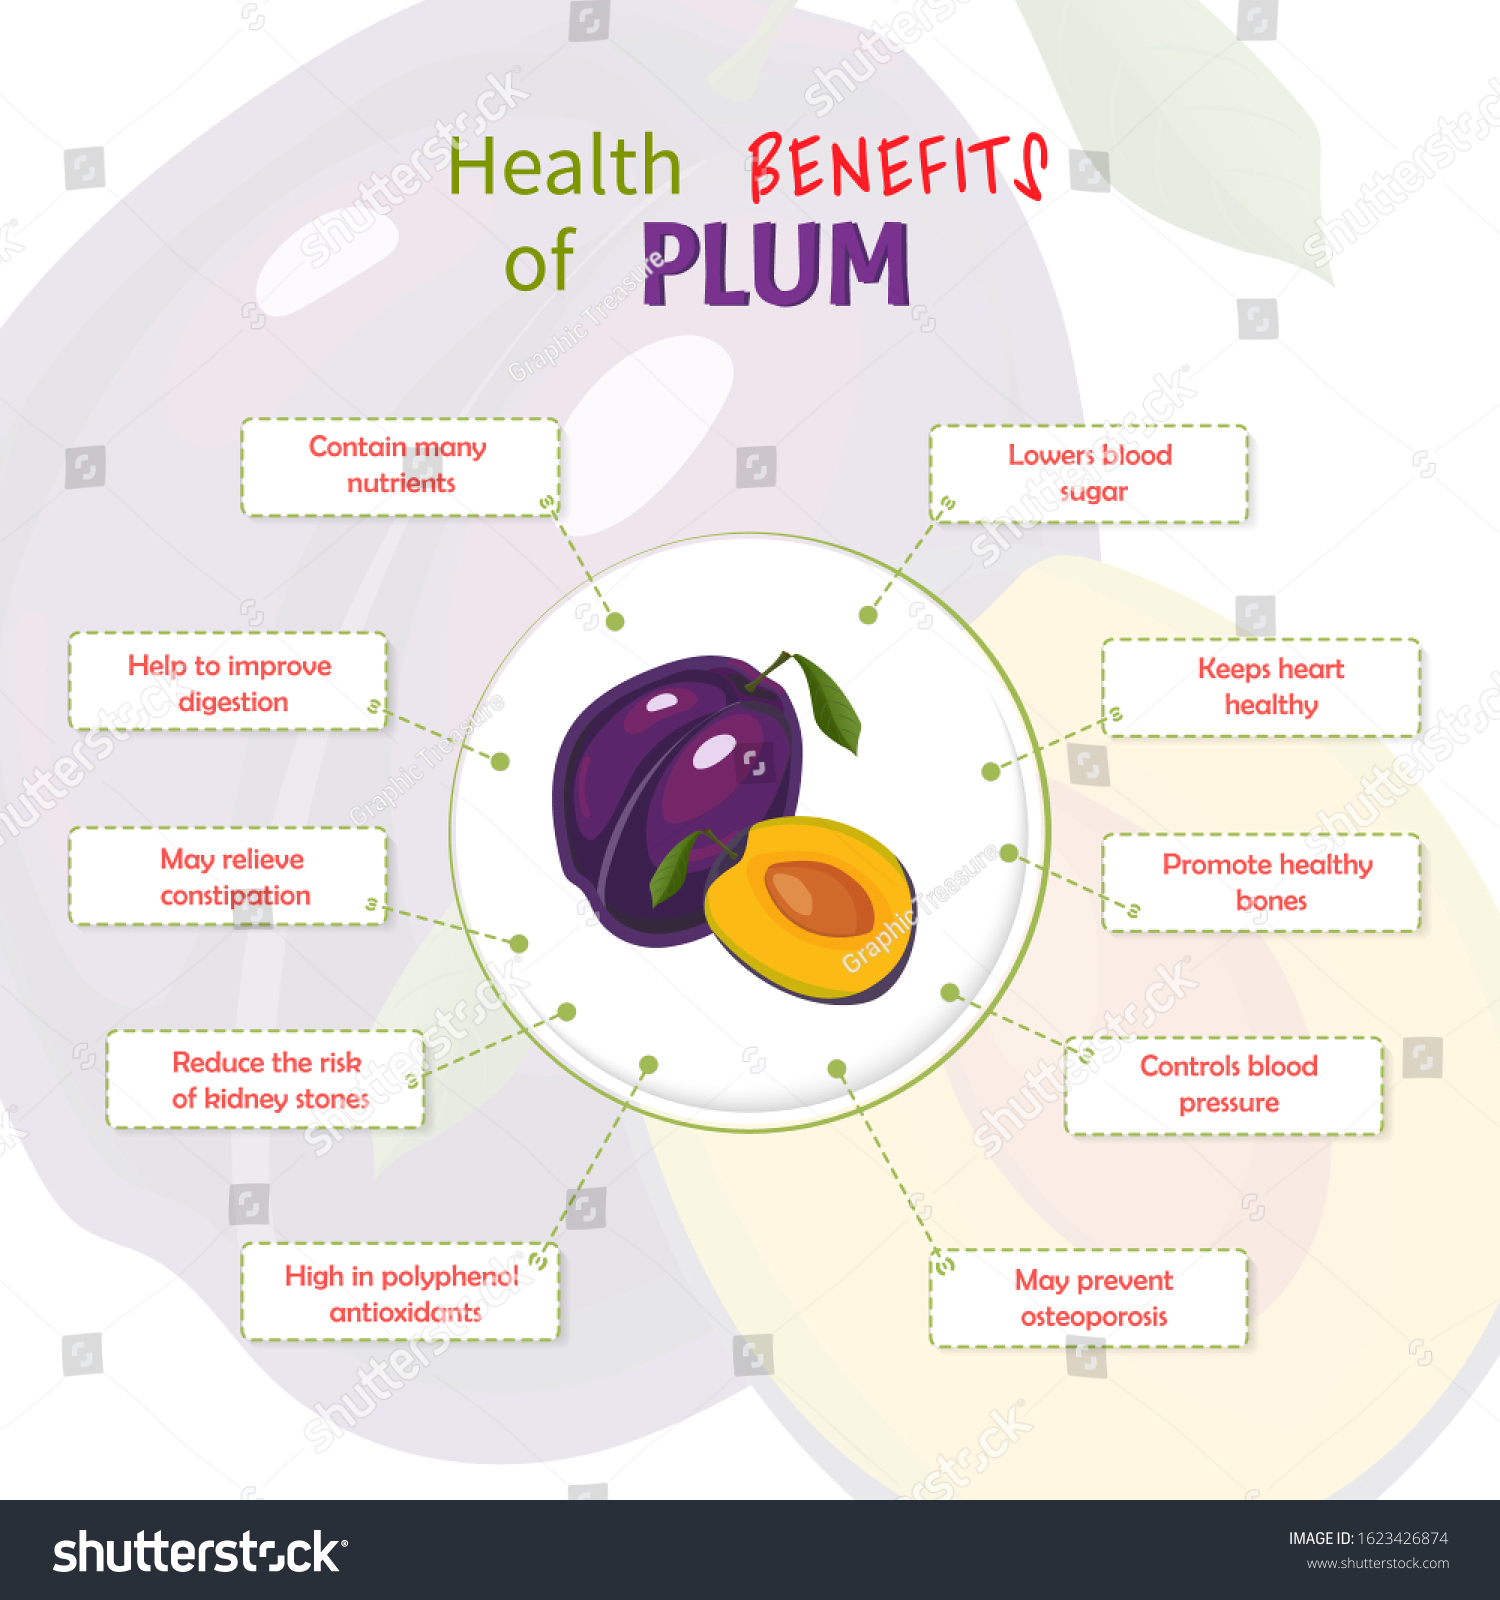 Health Benefits Of Plum Plums Nutrients Royalty Free Stock Vector 1623426874 5075